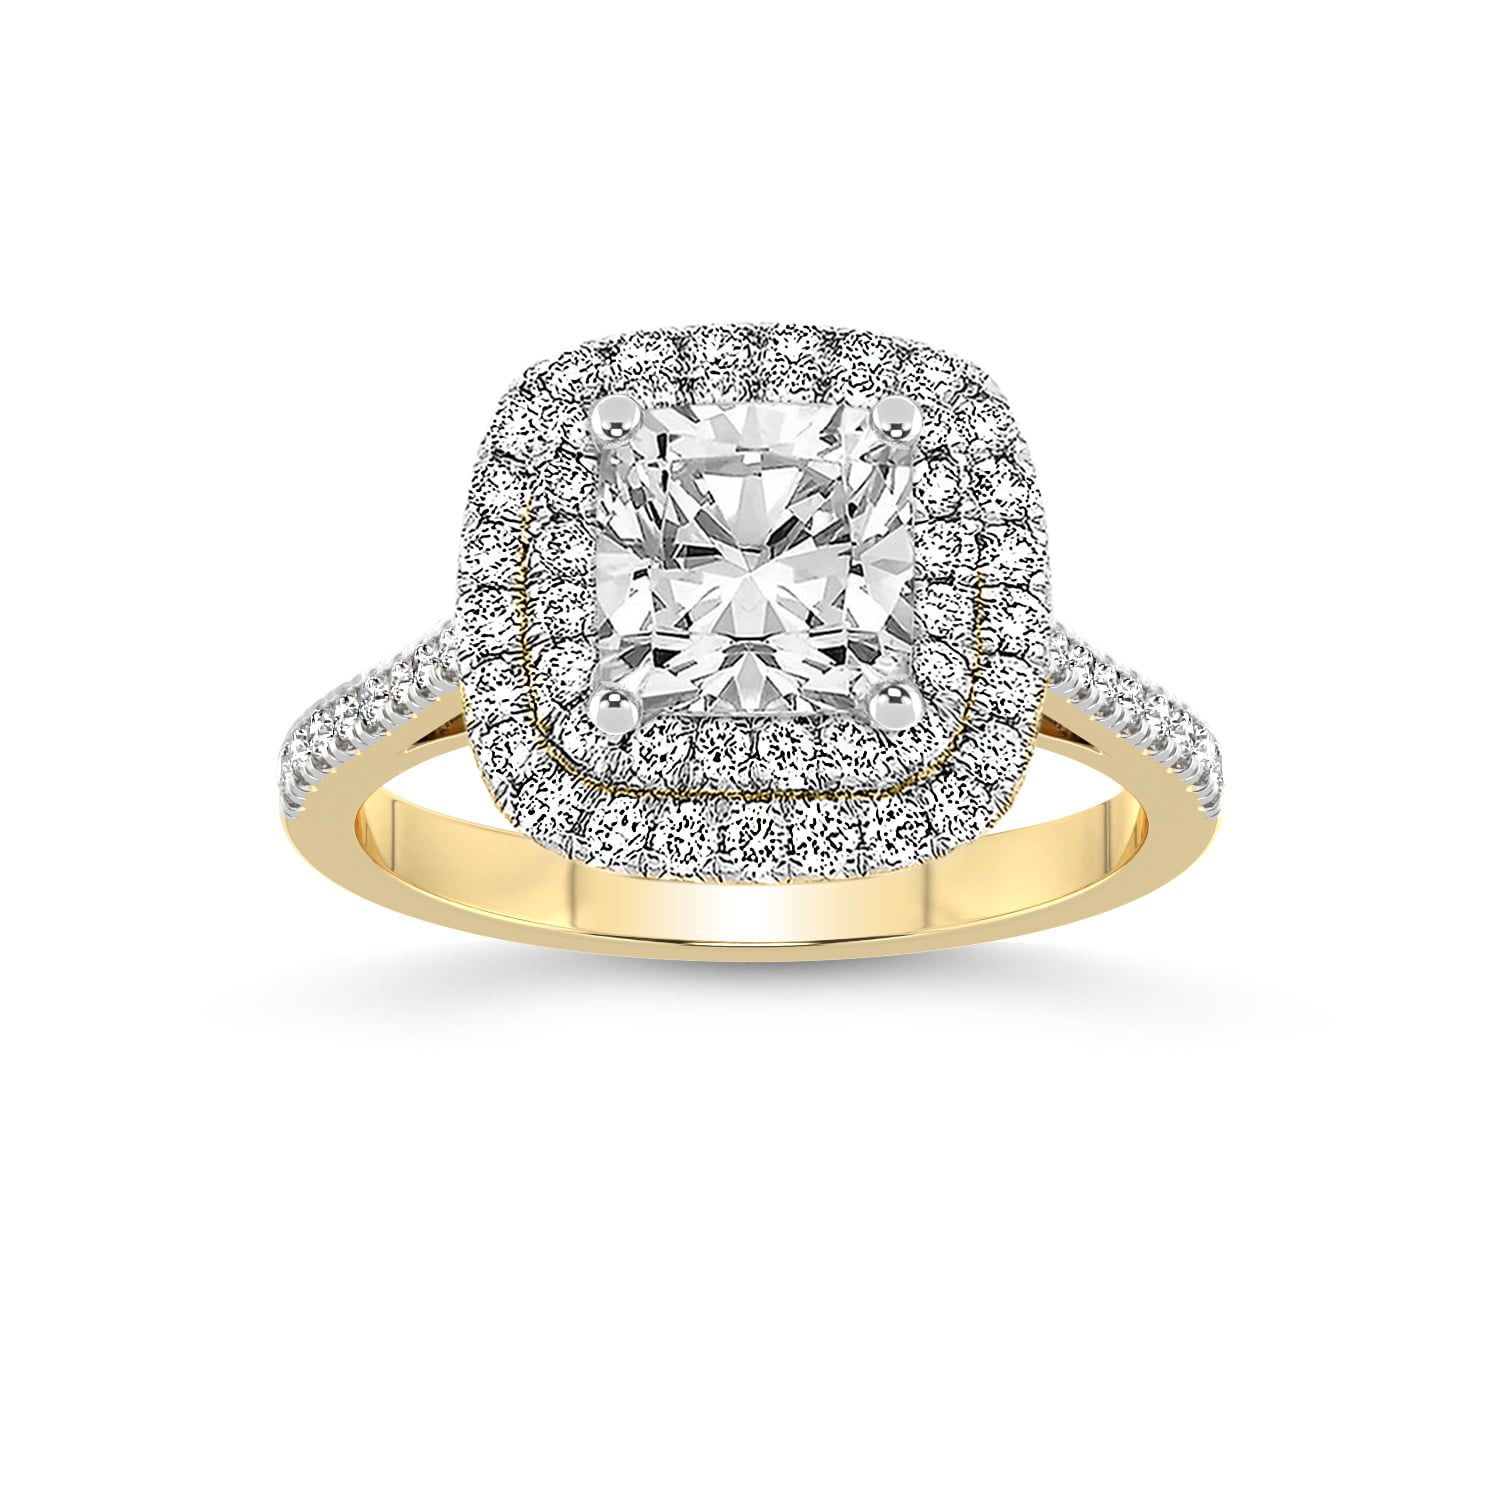 Buy 1920's Art Deco Diamond Engagement Ring 1.43 ctw in Platinum GIA  Certified Online | Arnold Jewelers